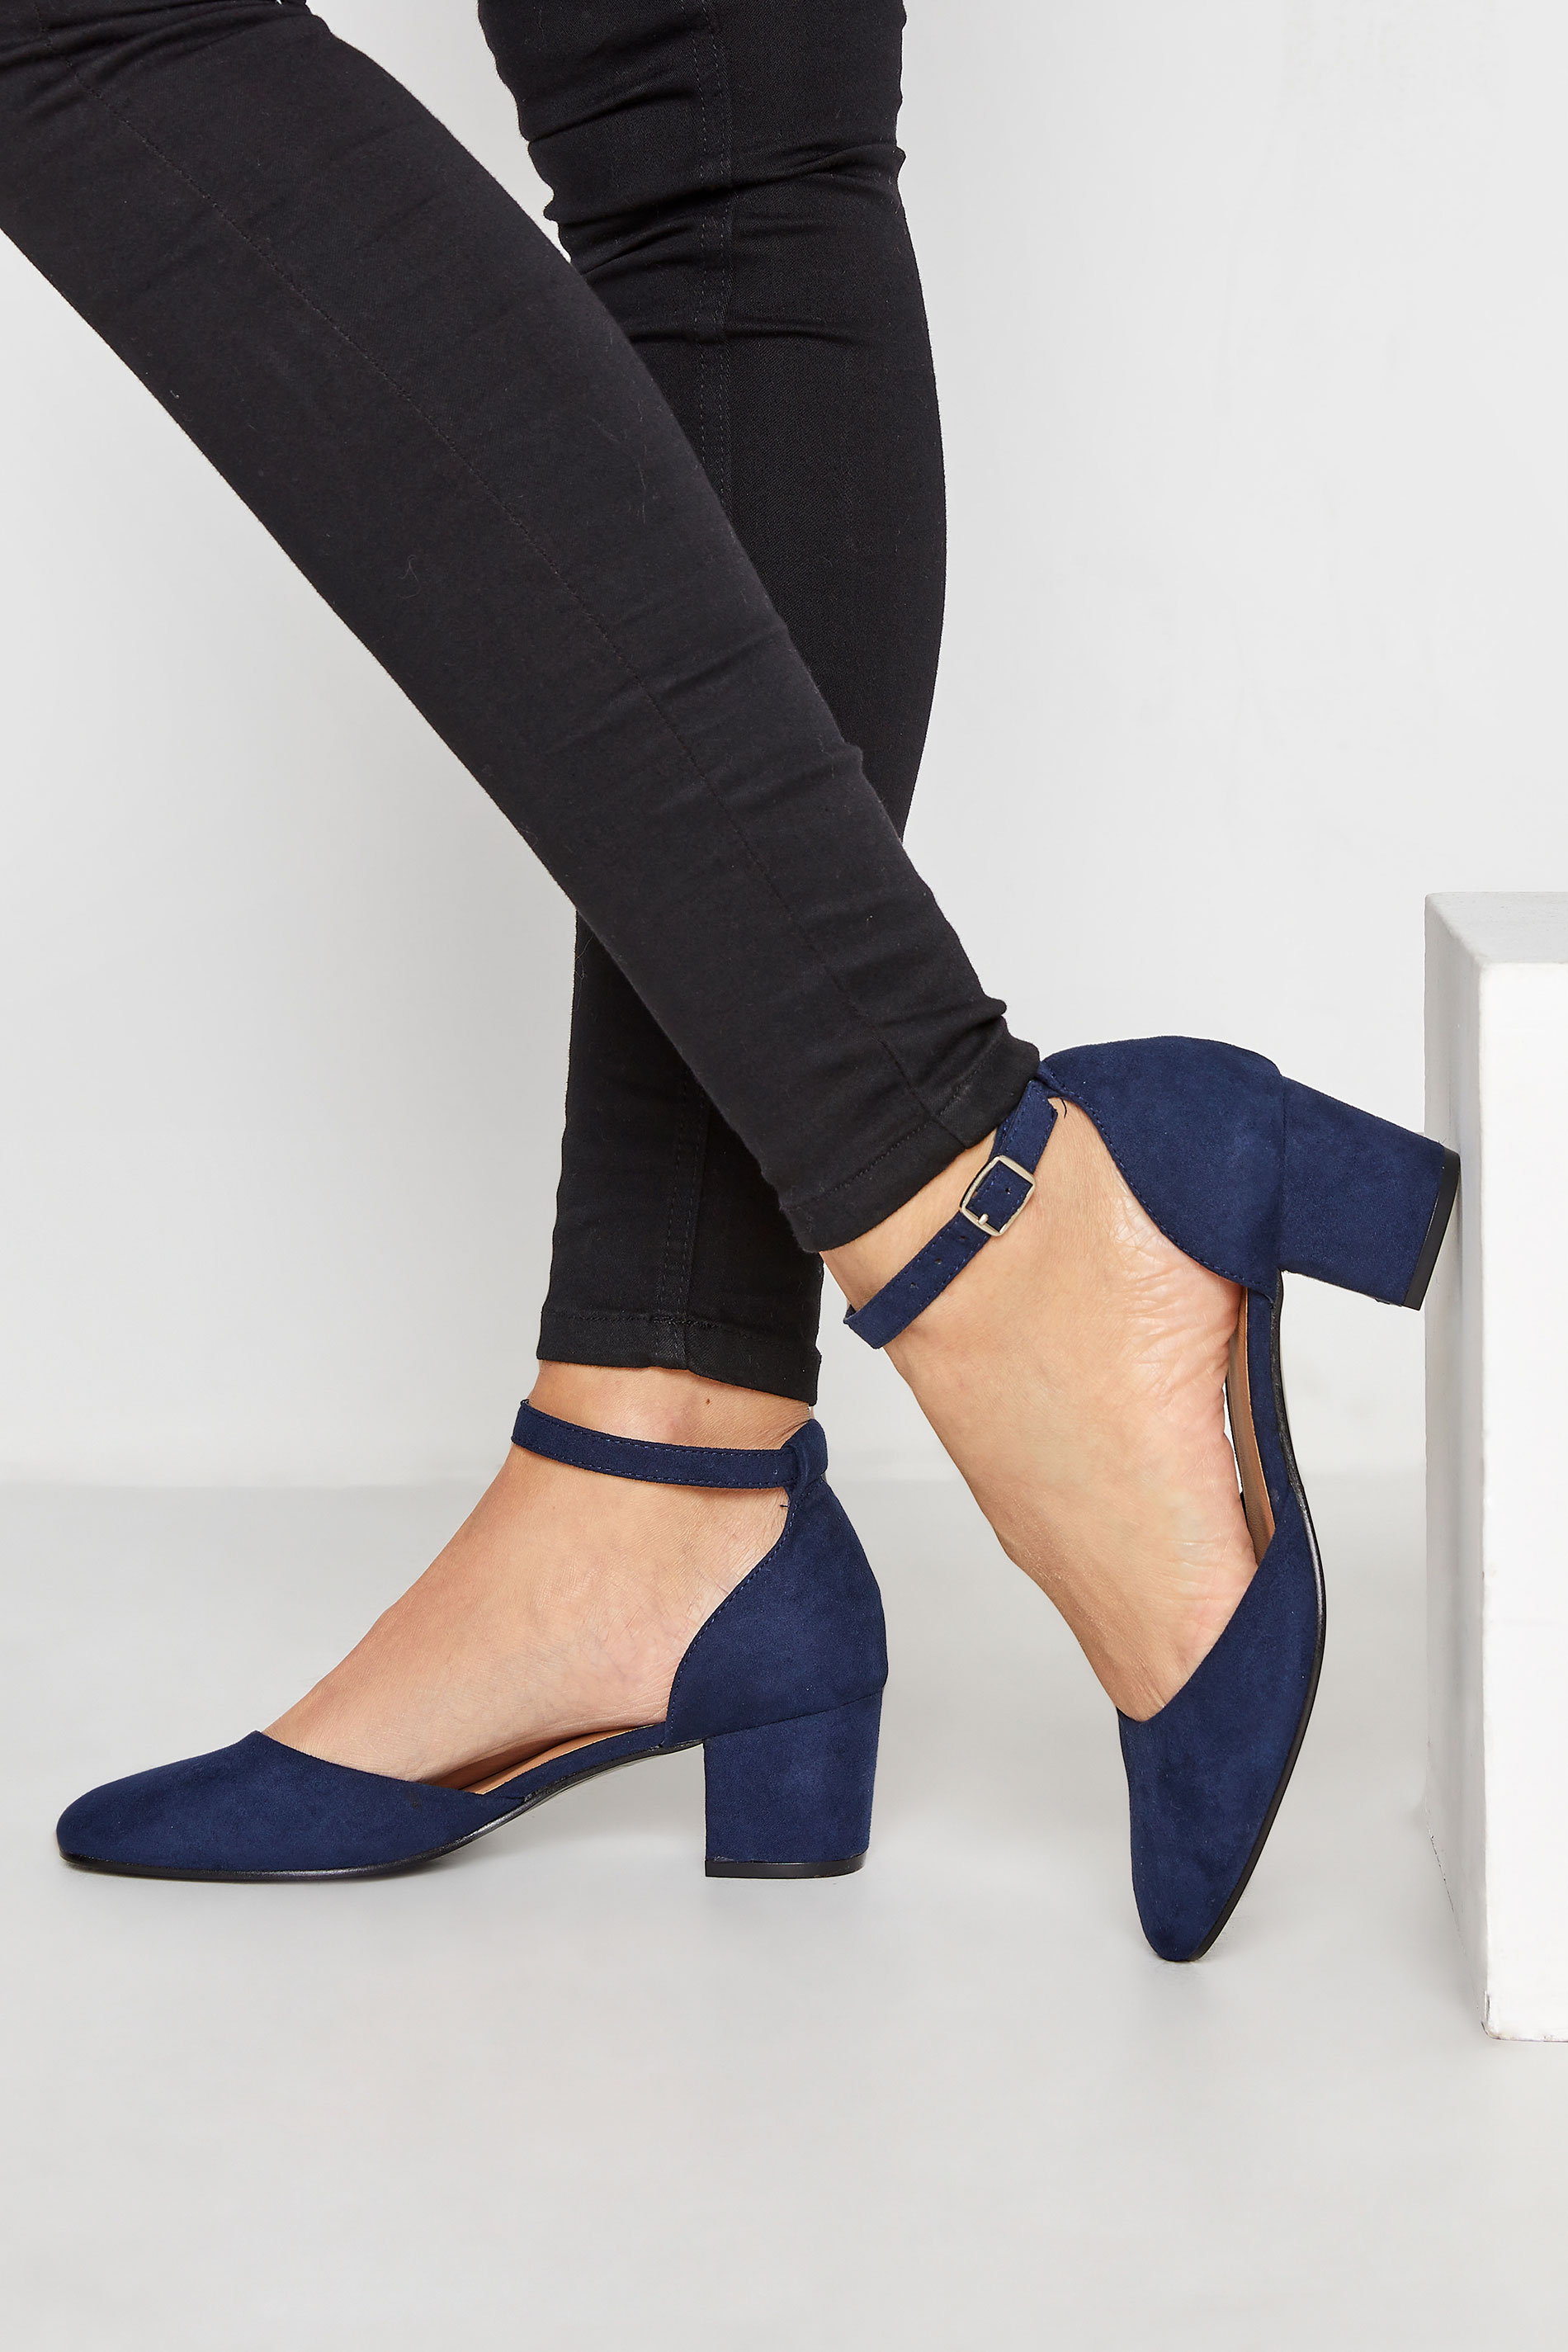 Women's Court Shoes - Heeled Court Shoes for Women | Pavers™ Ireland